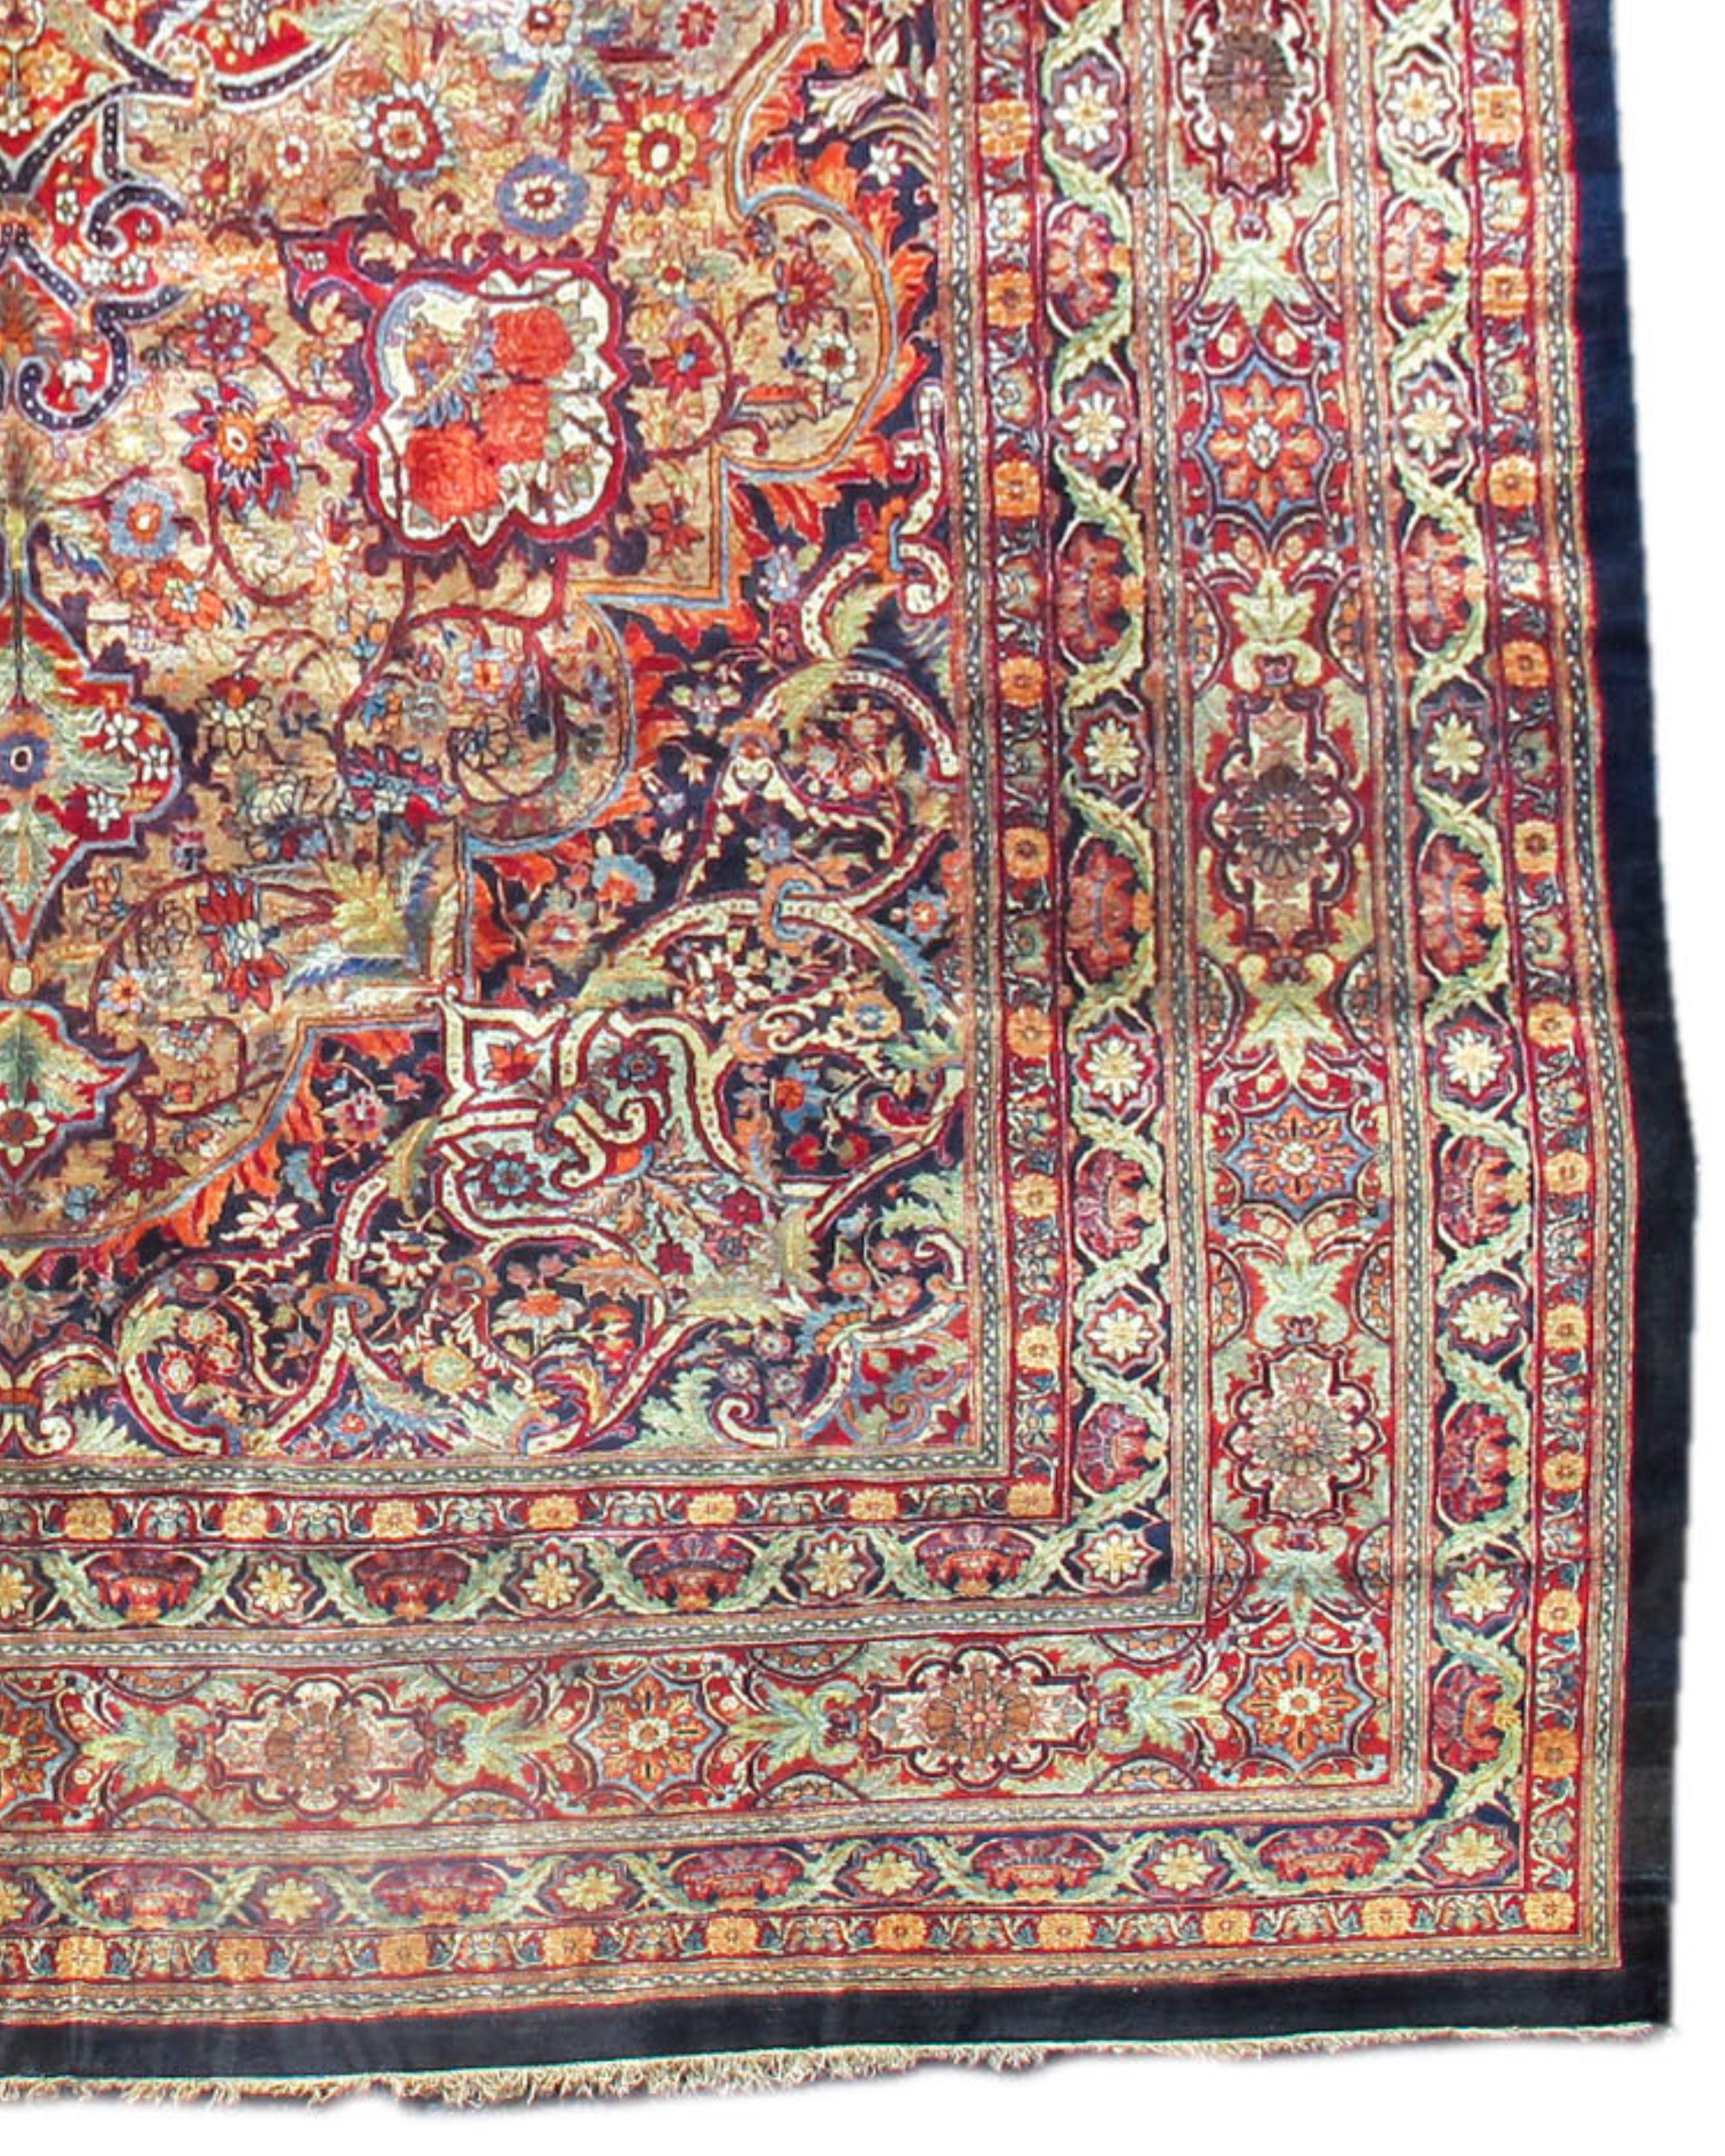 Wool Antique Large Oversized Northeast Persian Carpet, Early 20th Century For Sale